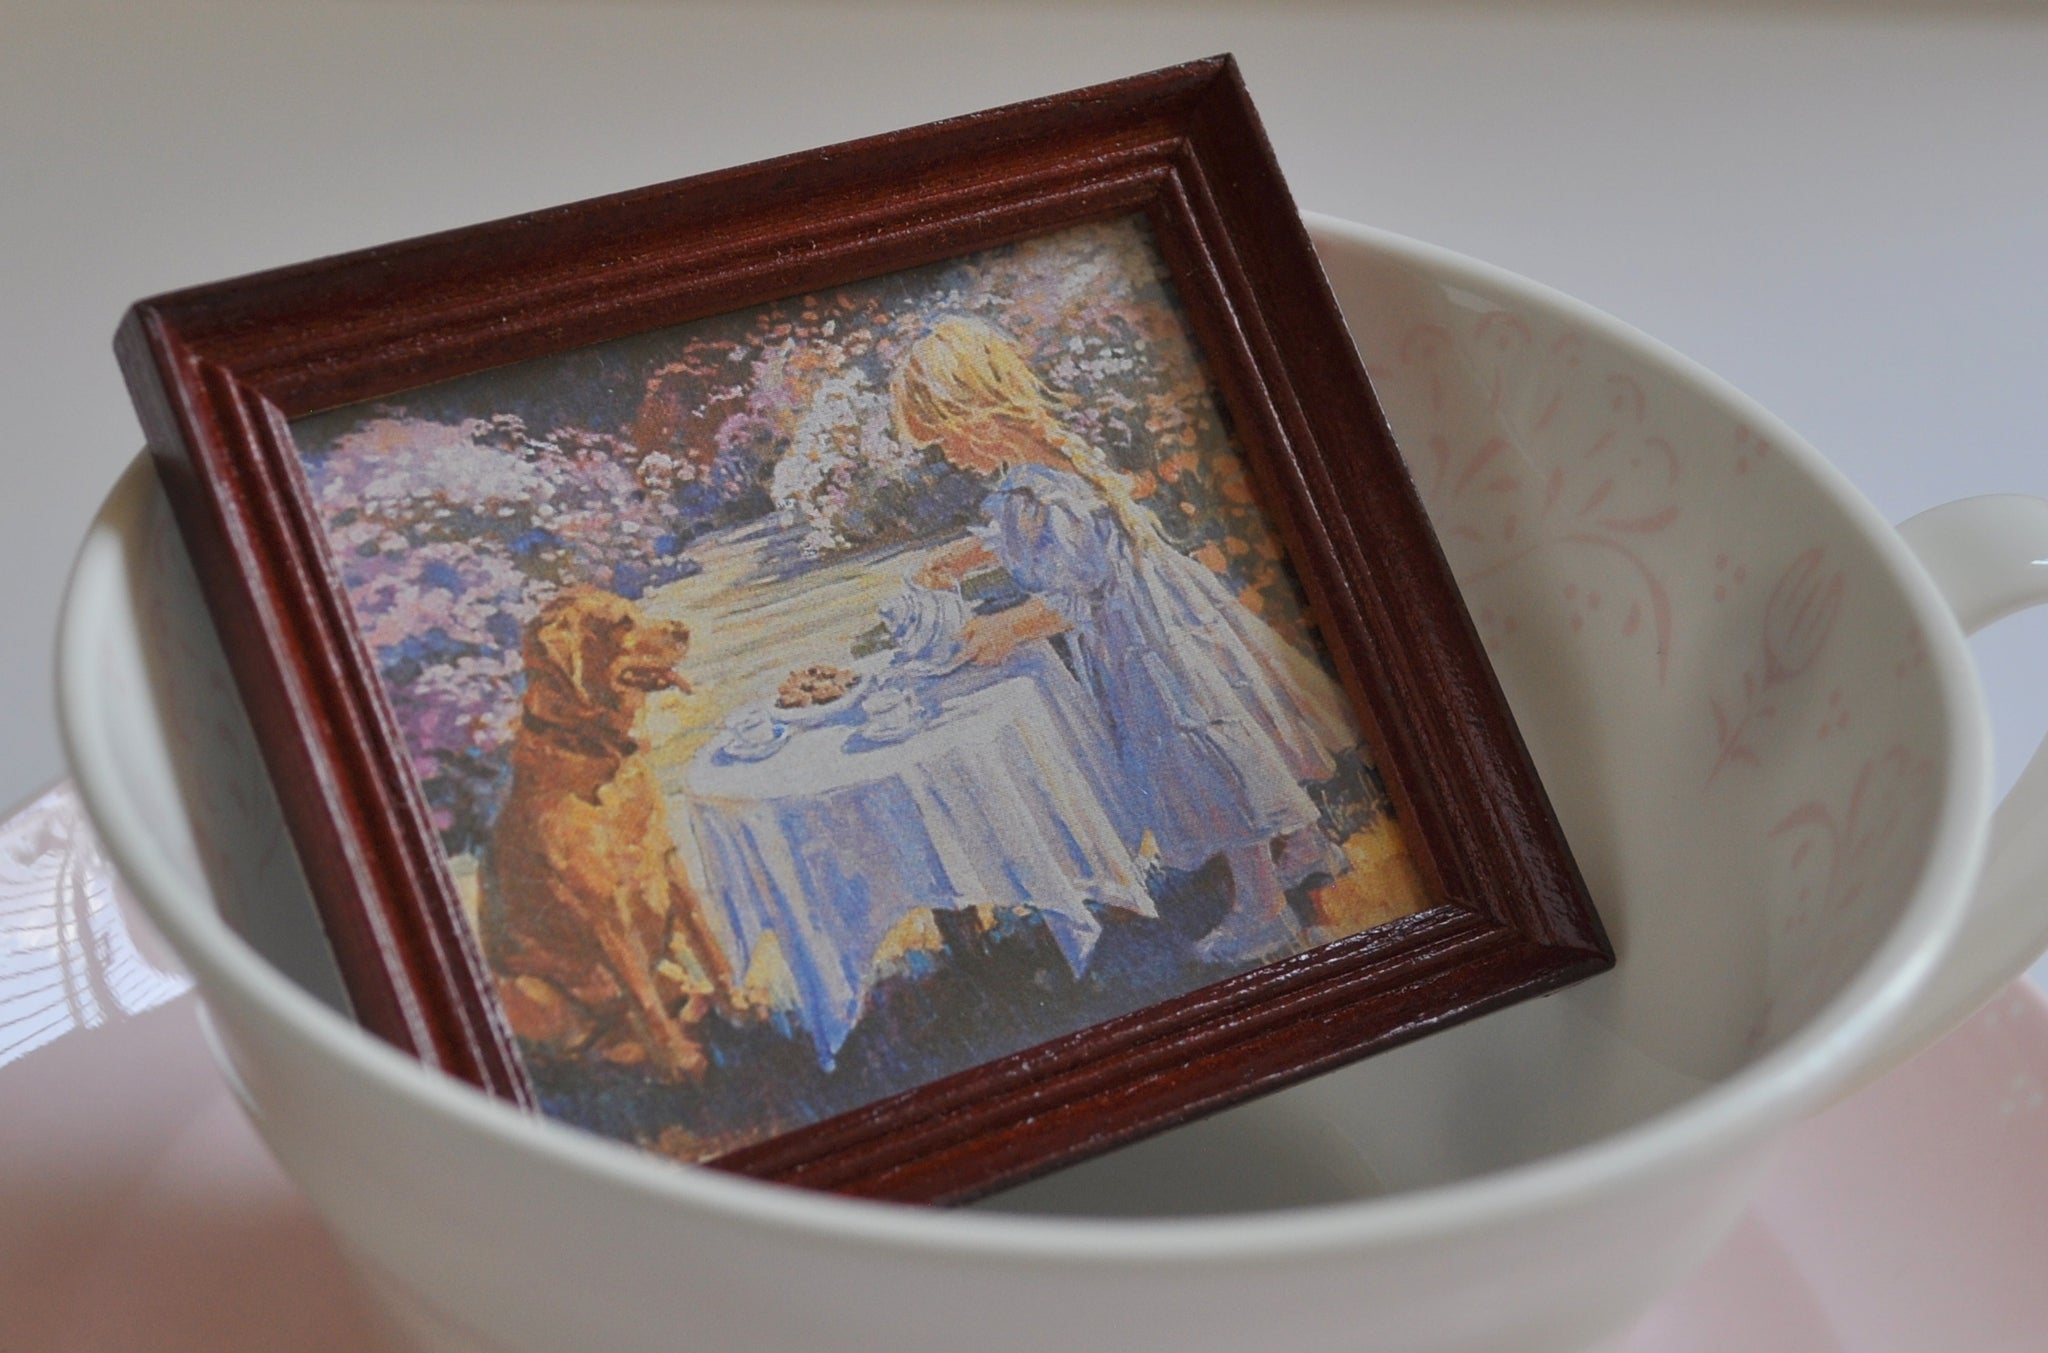 ESTATE TREASURE: Framed "Tea for Two" Print by Jacqueline's